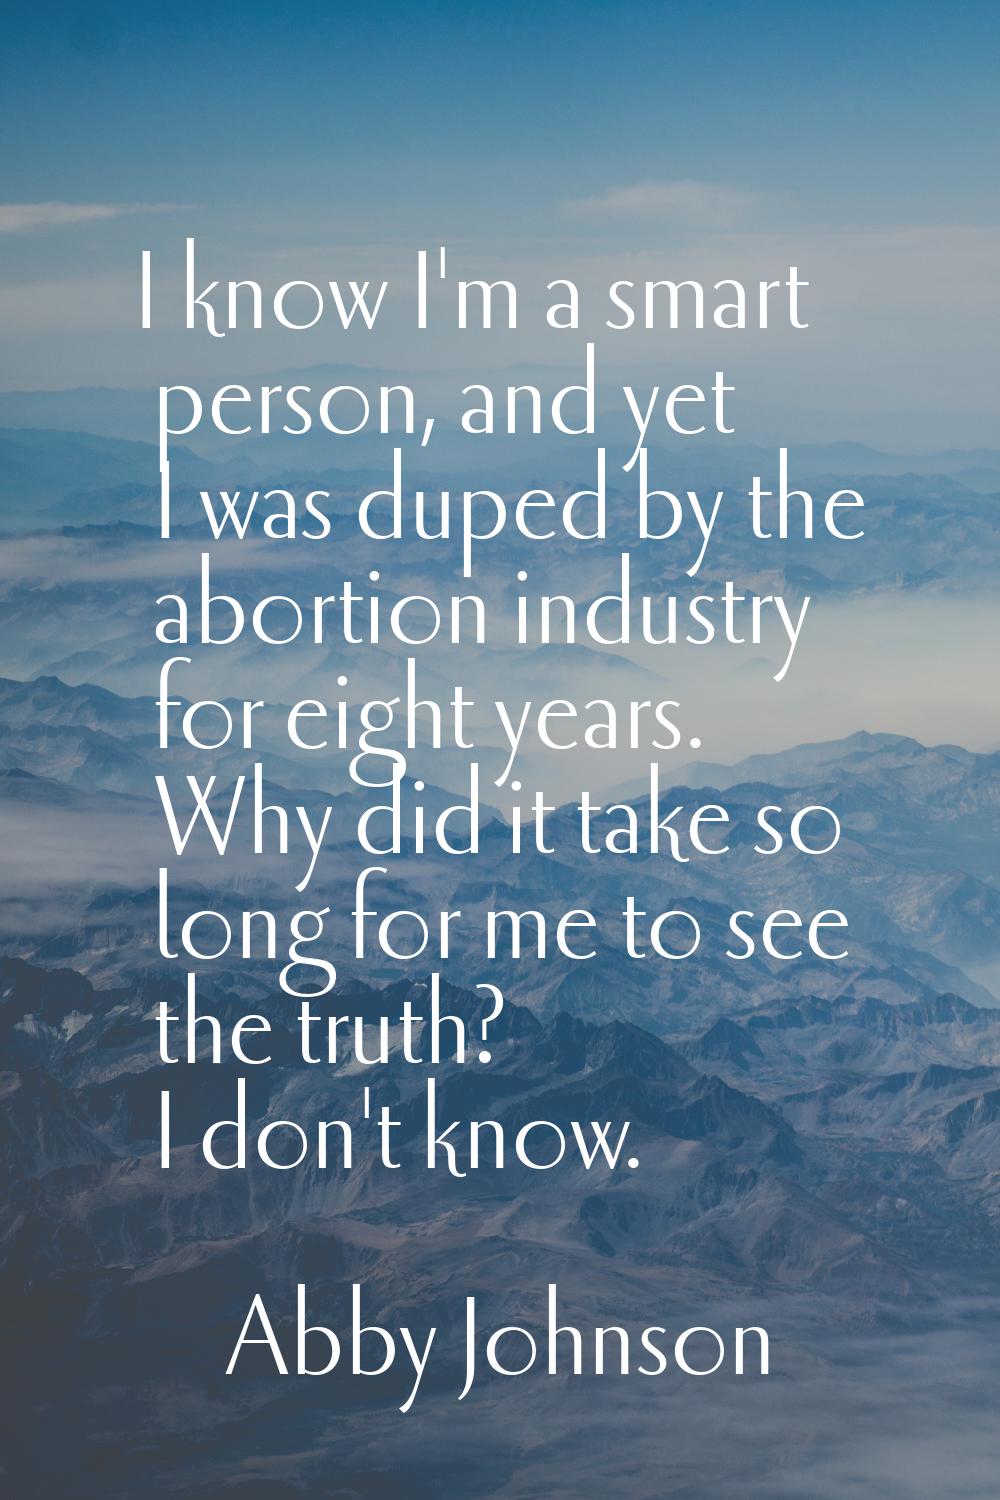 I know I'm a smart person, and yet I was duped by the abortion industry for eight years. Why did it